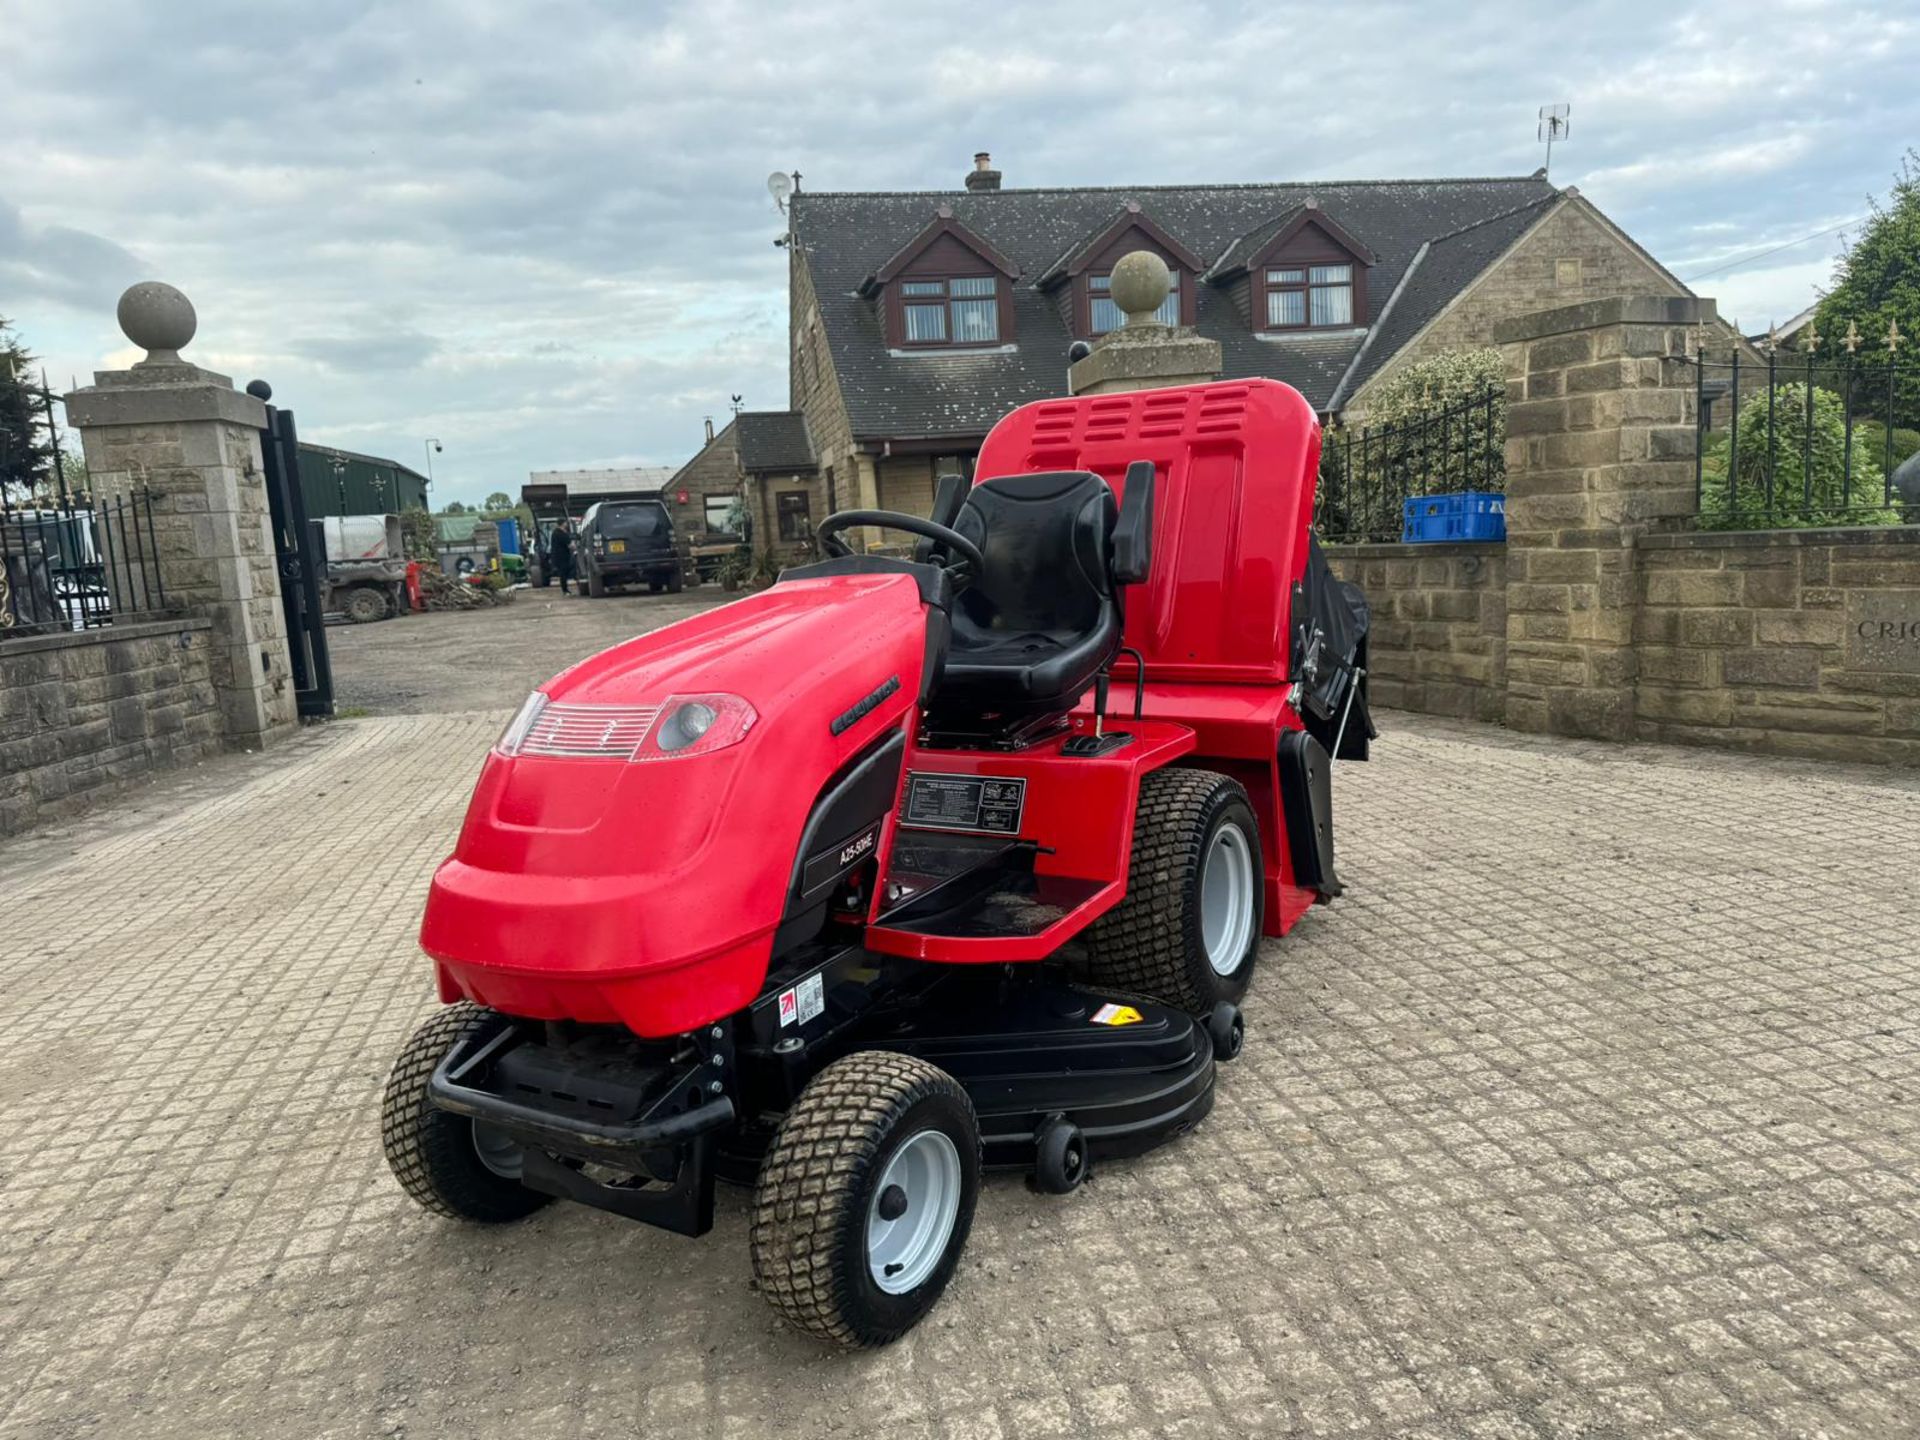 2021 COUNTAX A25-50 RIDE ON LAWN MOWER *NO VAT* - Image 9 of 22